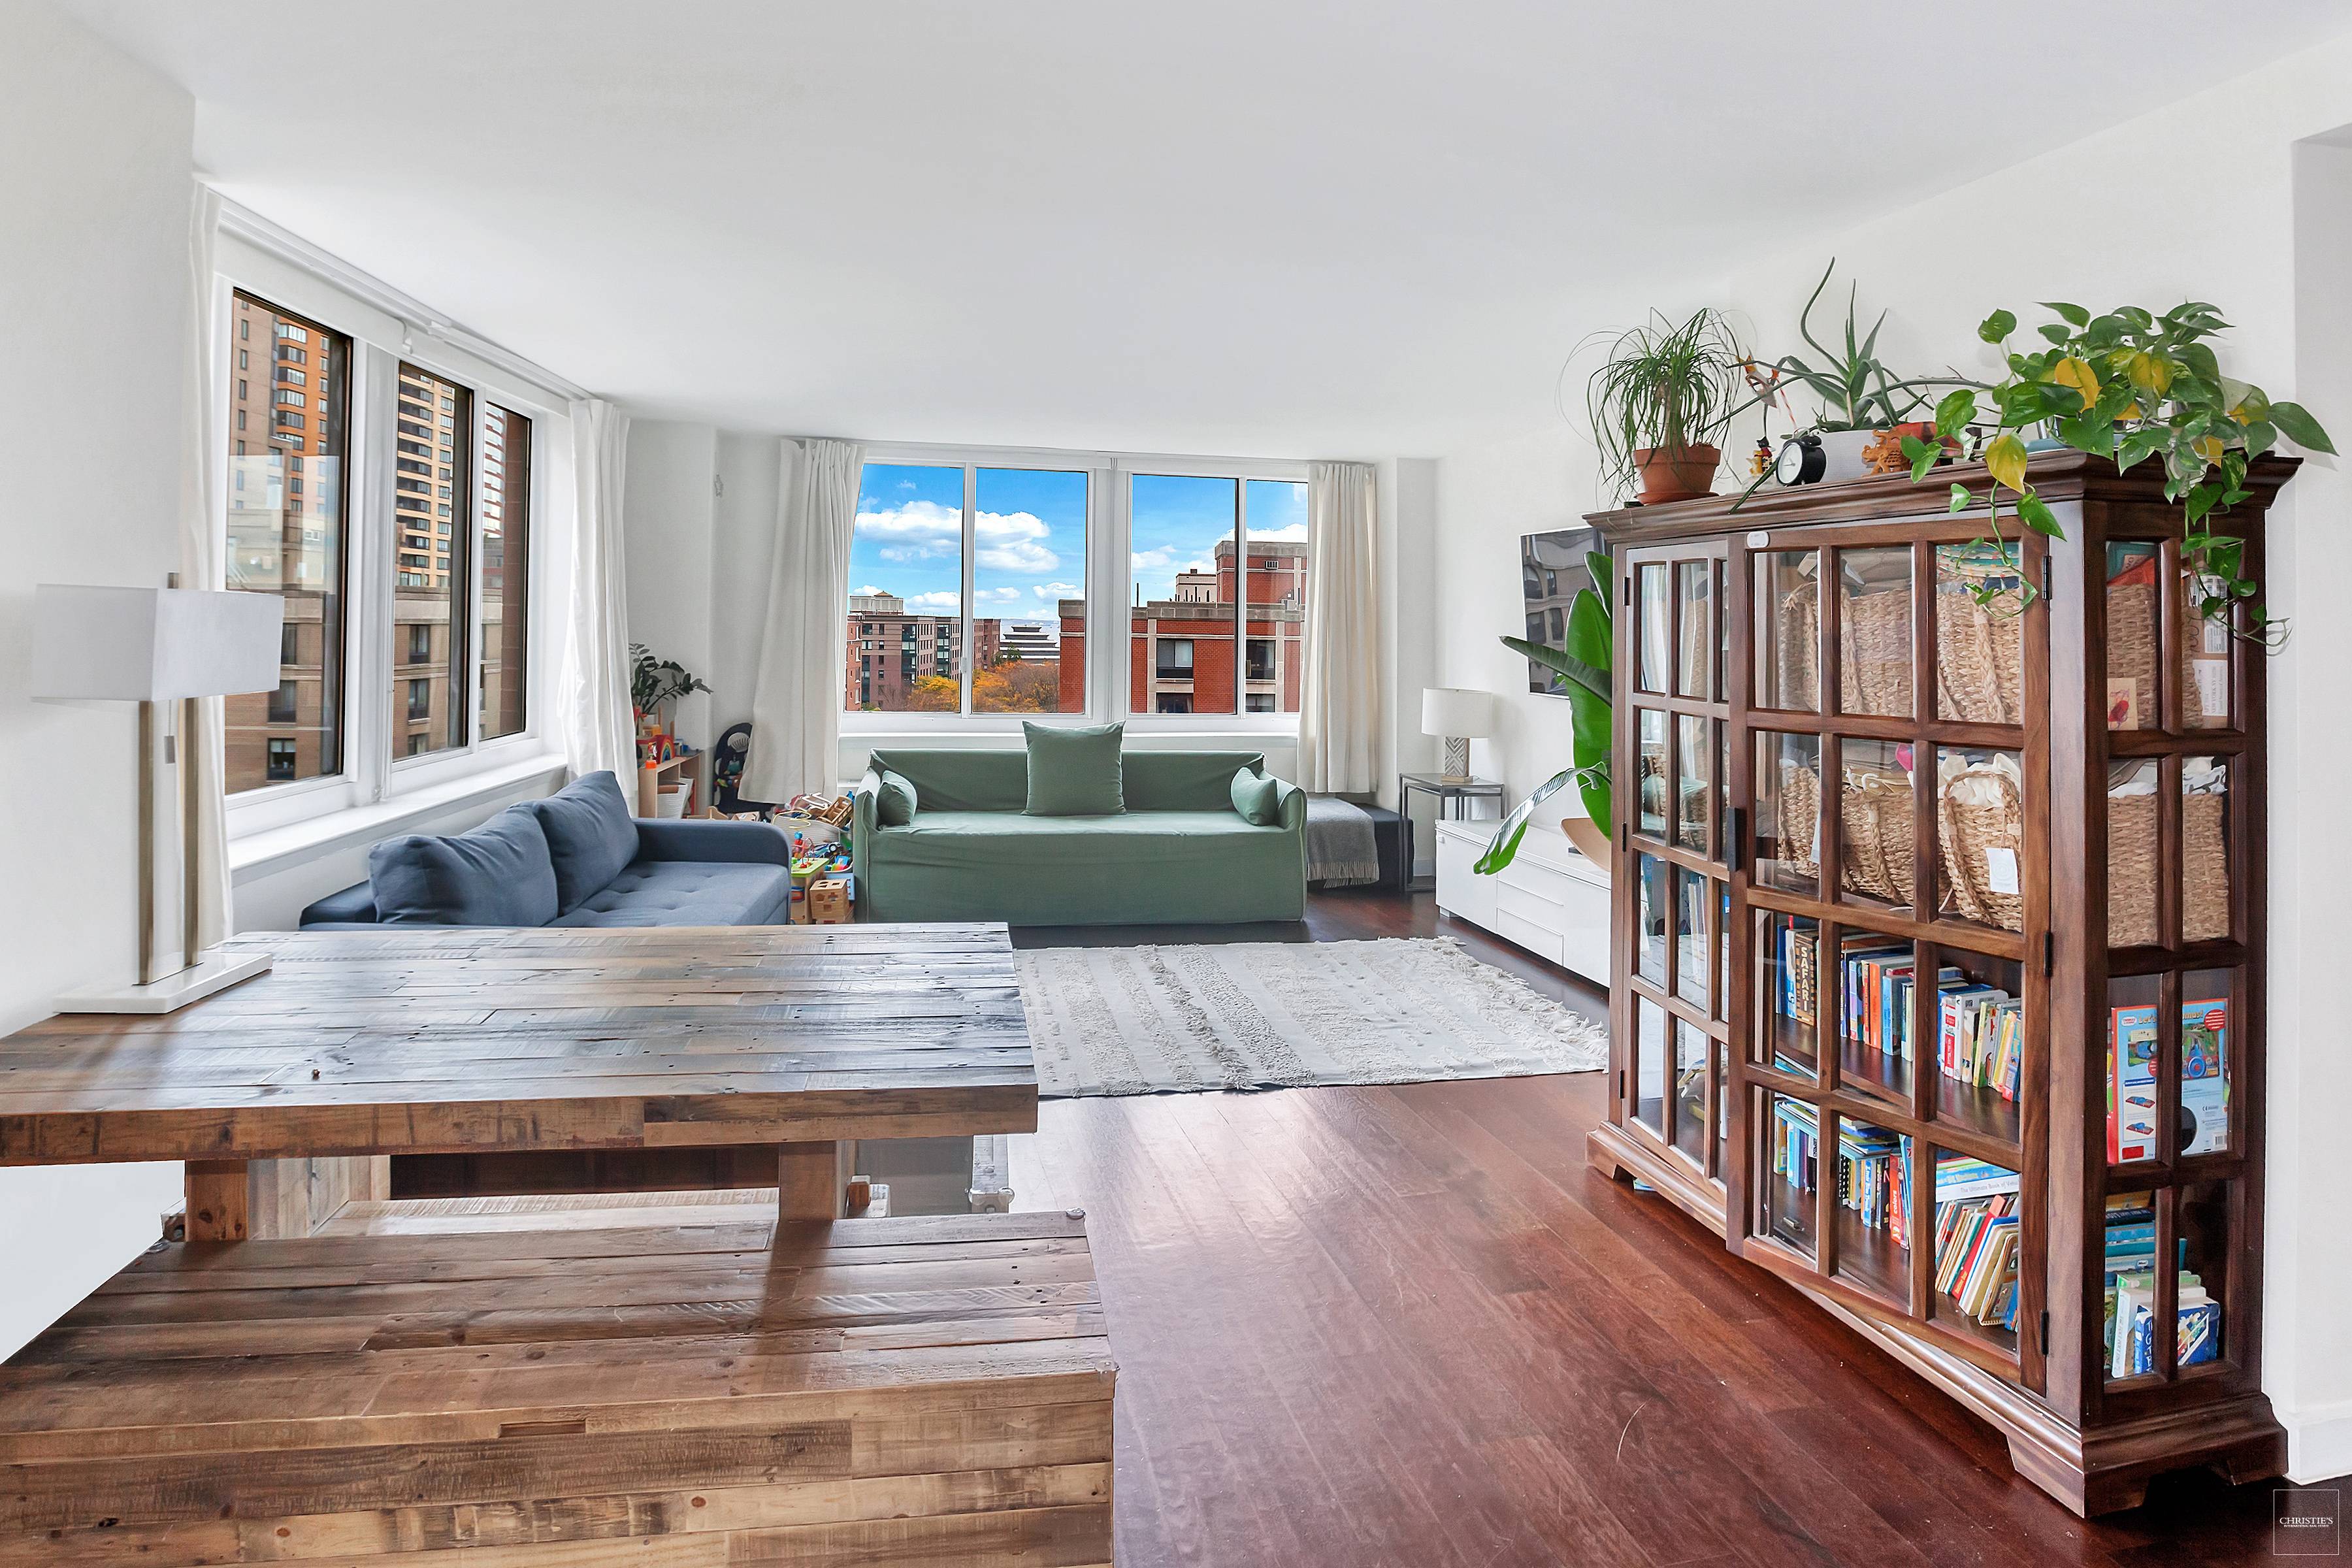 NEW Listing A very well priced 2br home in one of the most desirable condominium in Battery Park City.